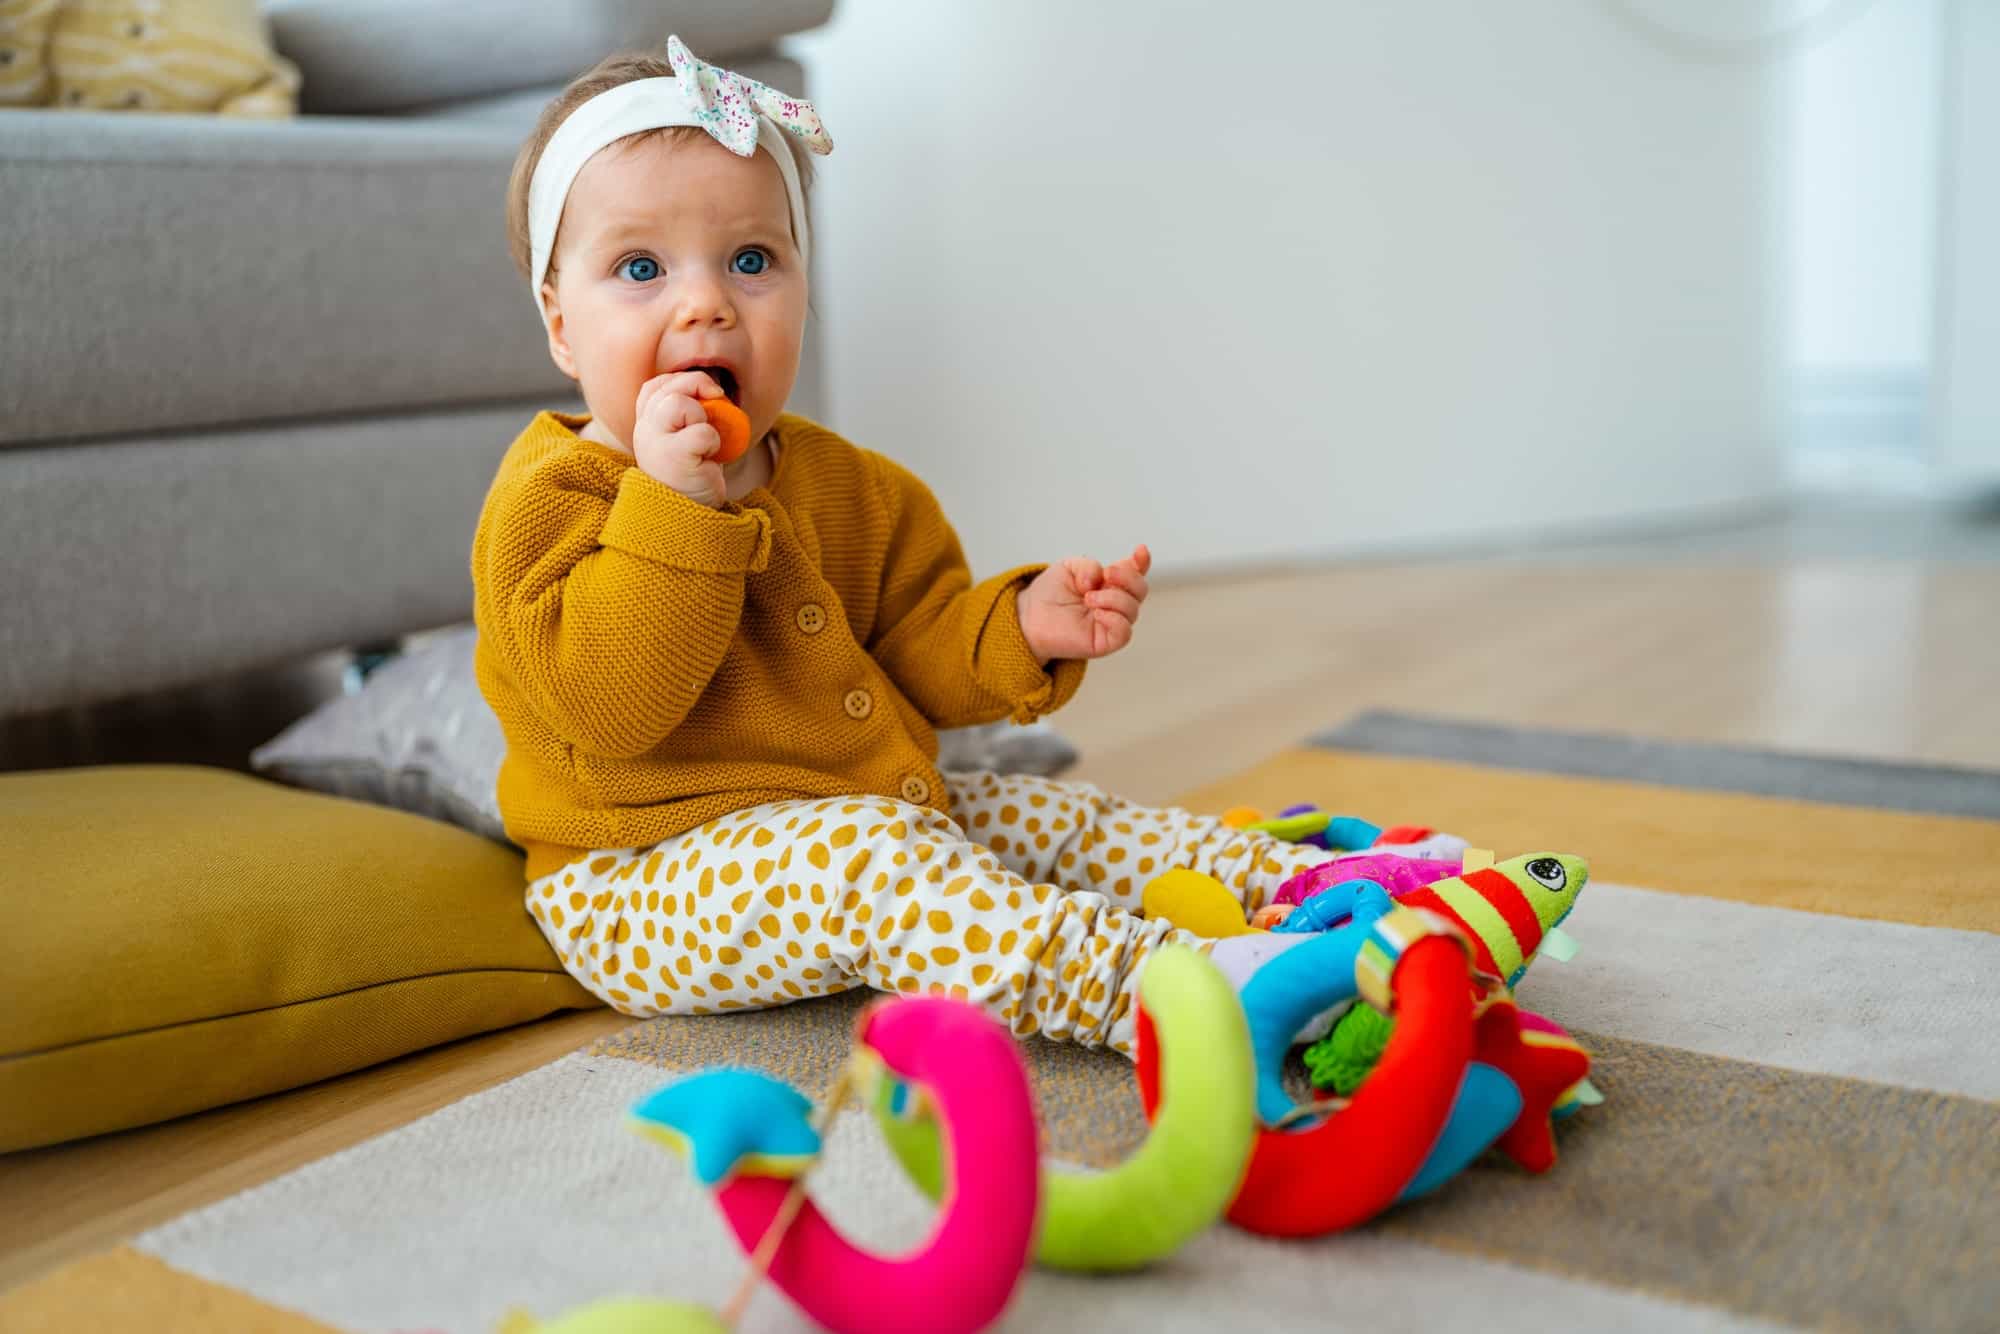 Adorable baby playing with colorful toy at home